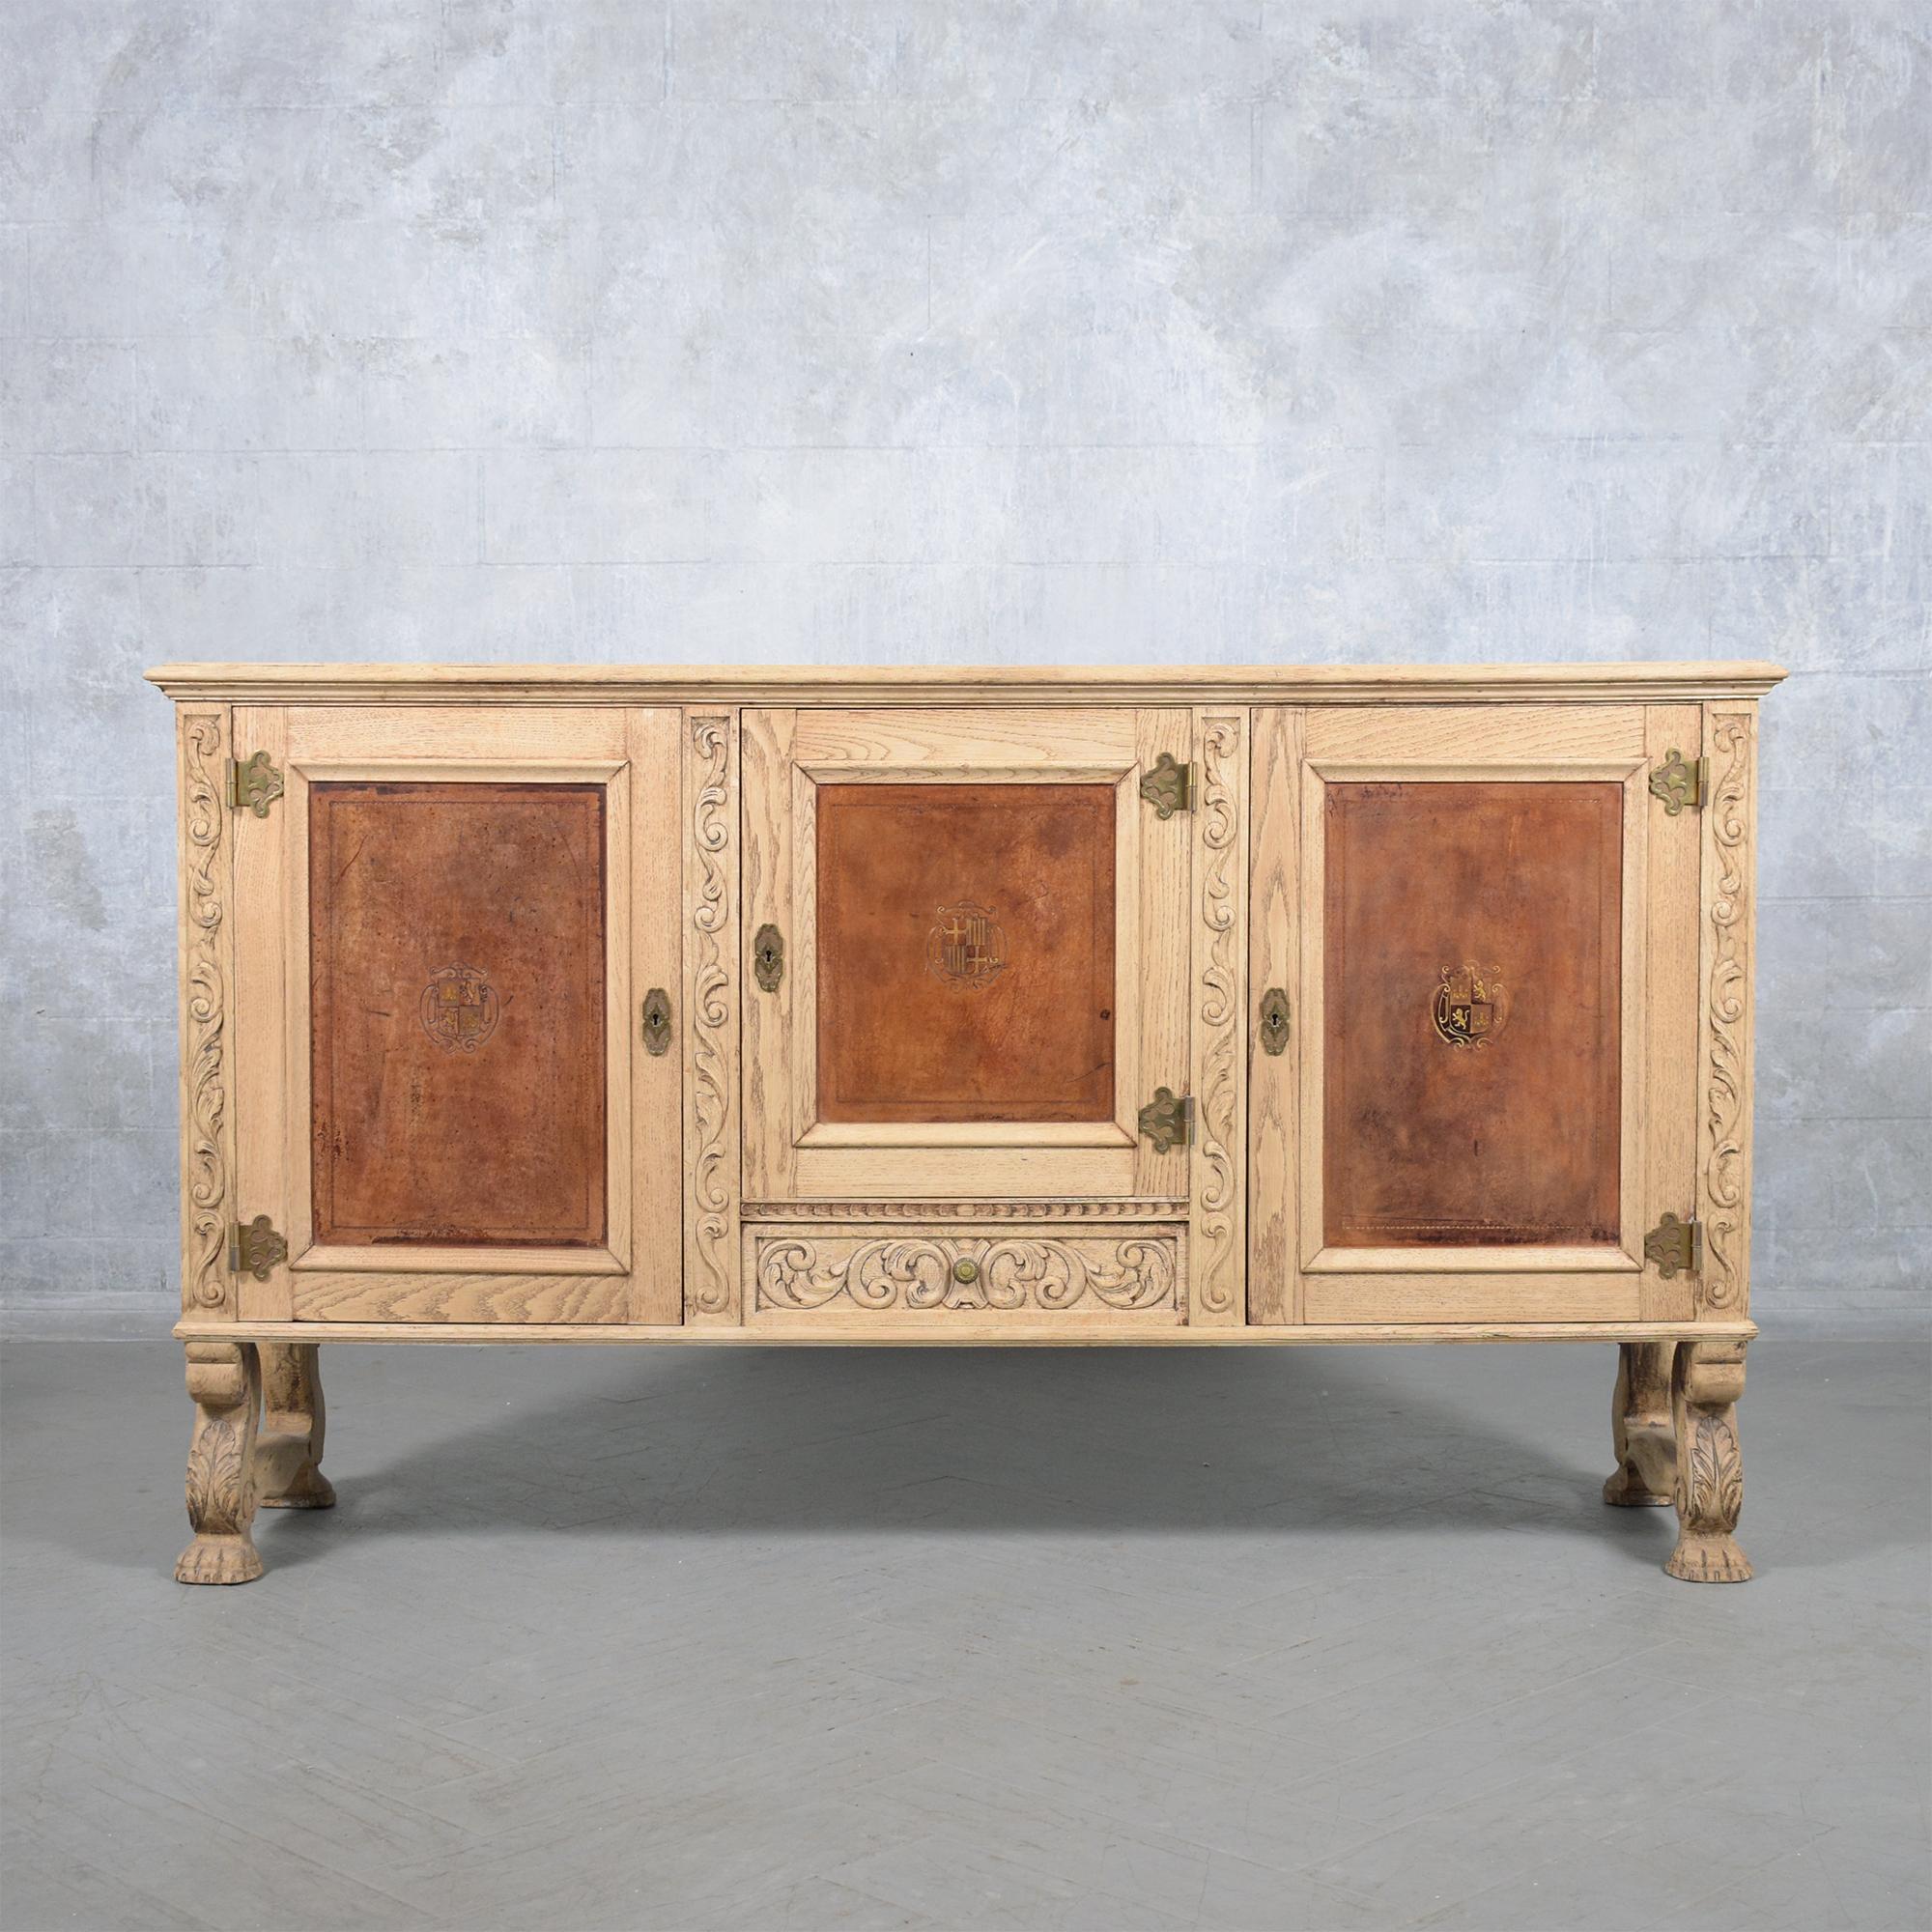 Elevate your dining or living space with this exquisite antique French buffet, beautifully crafted from solid oak. Our in-house team of professional craftsmen has meticulously restored and refinished this piece to highlight its quality and